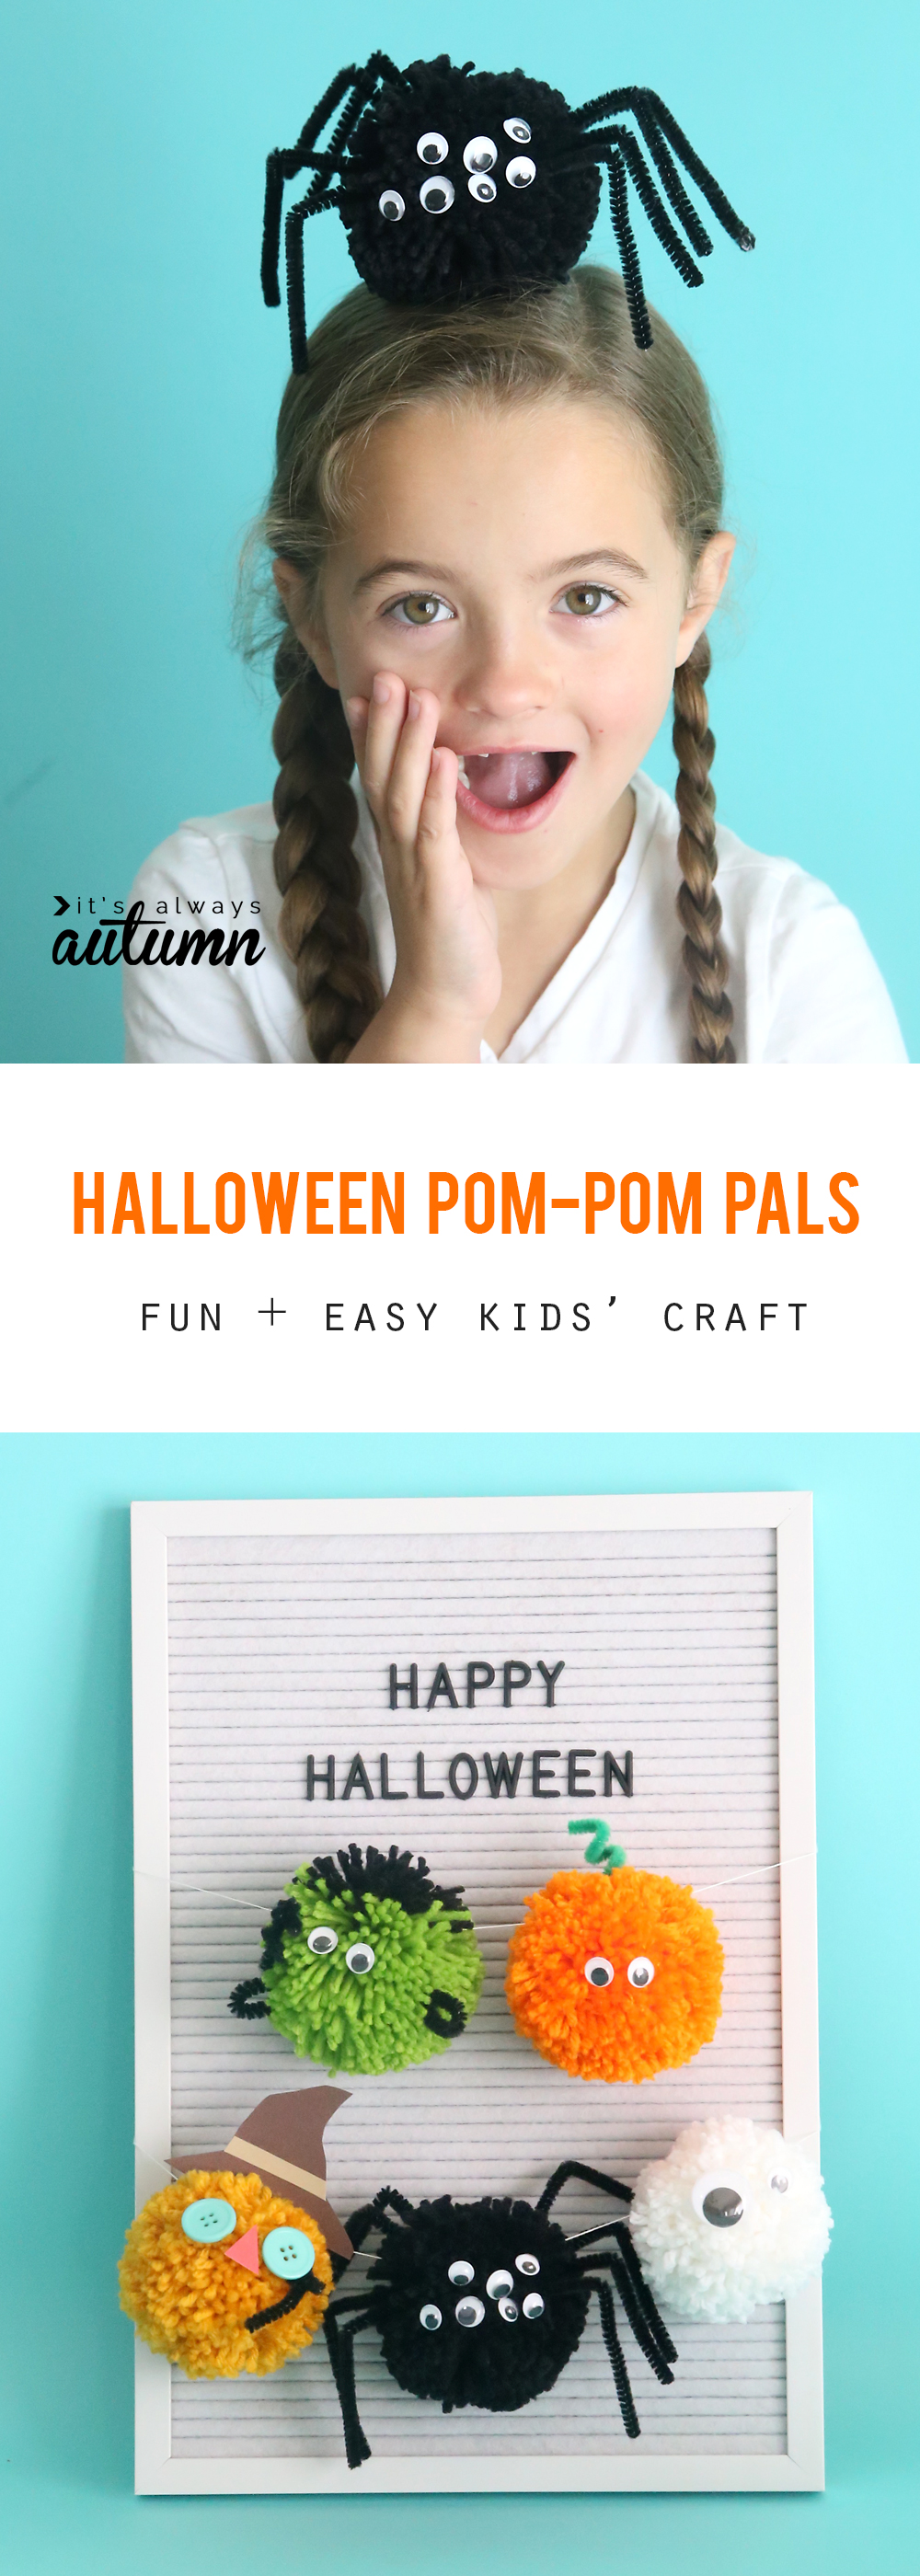 Girl with a pom pom spider on her head; Halloween pom poms hanging on a garland